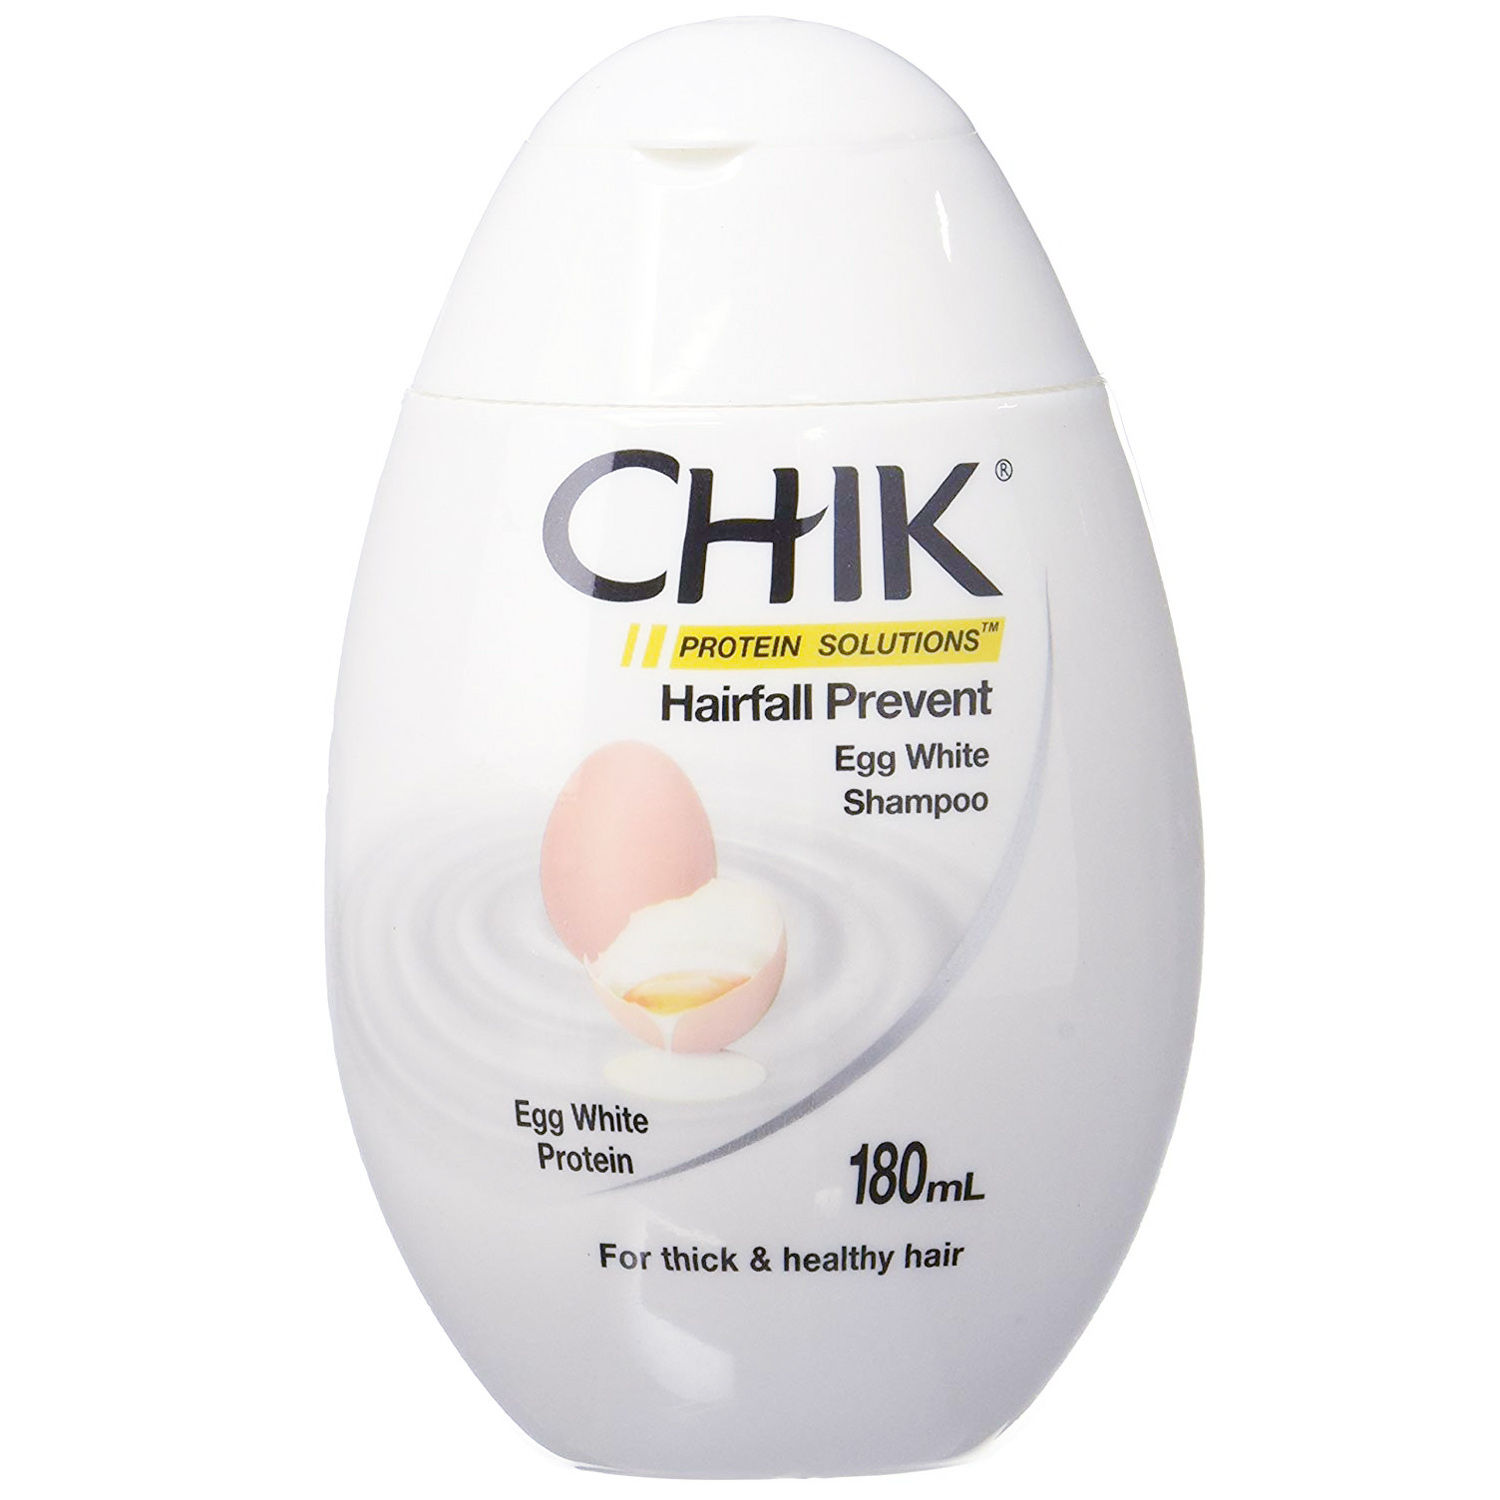 Chik Hairfall Prevent Egg White Protein ml Price, Uses, Side Effects, Composition - Apollo